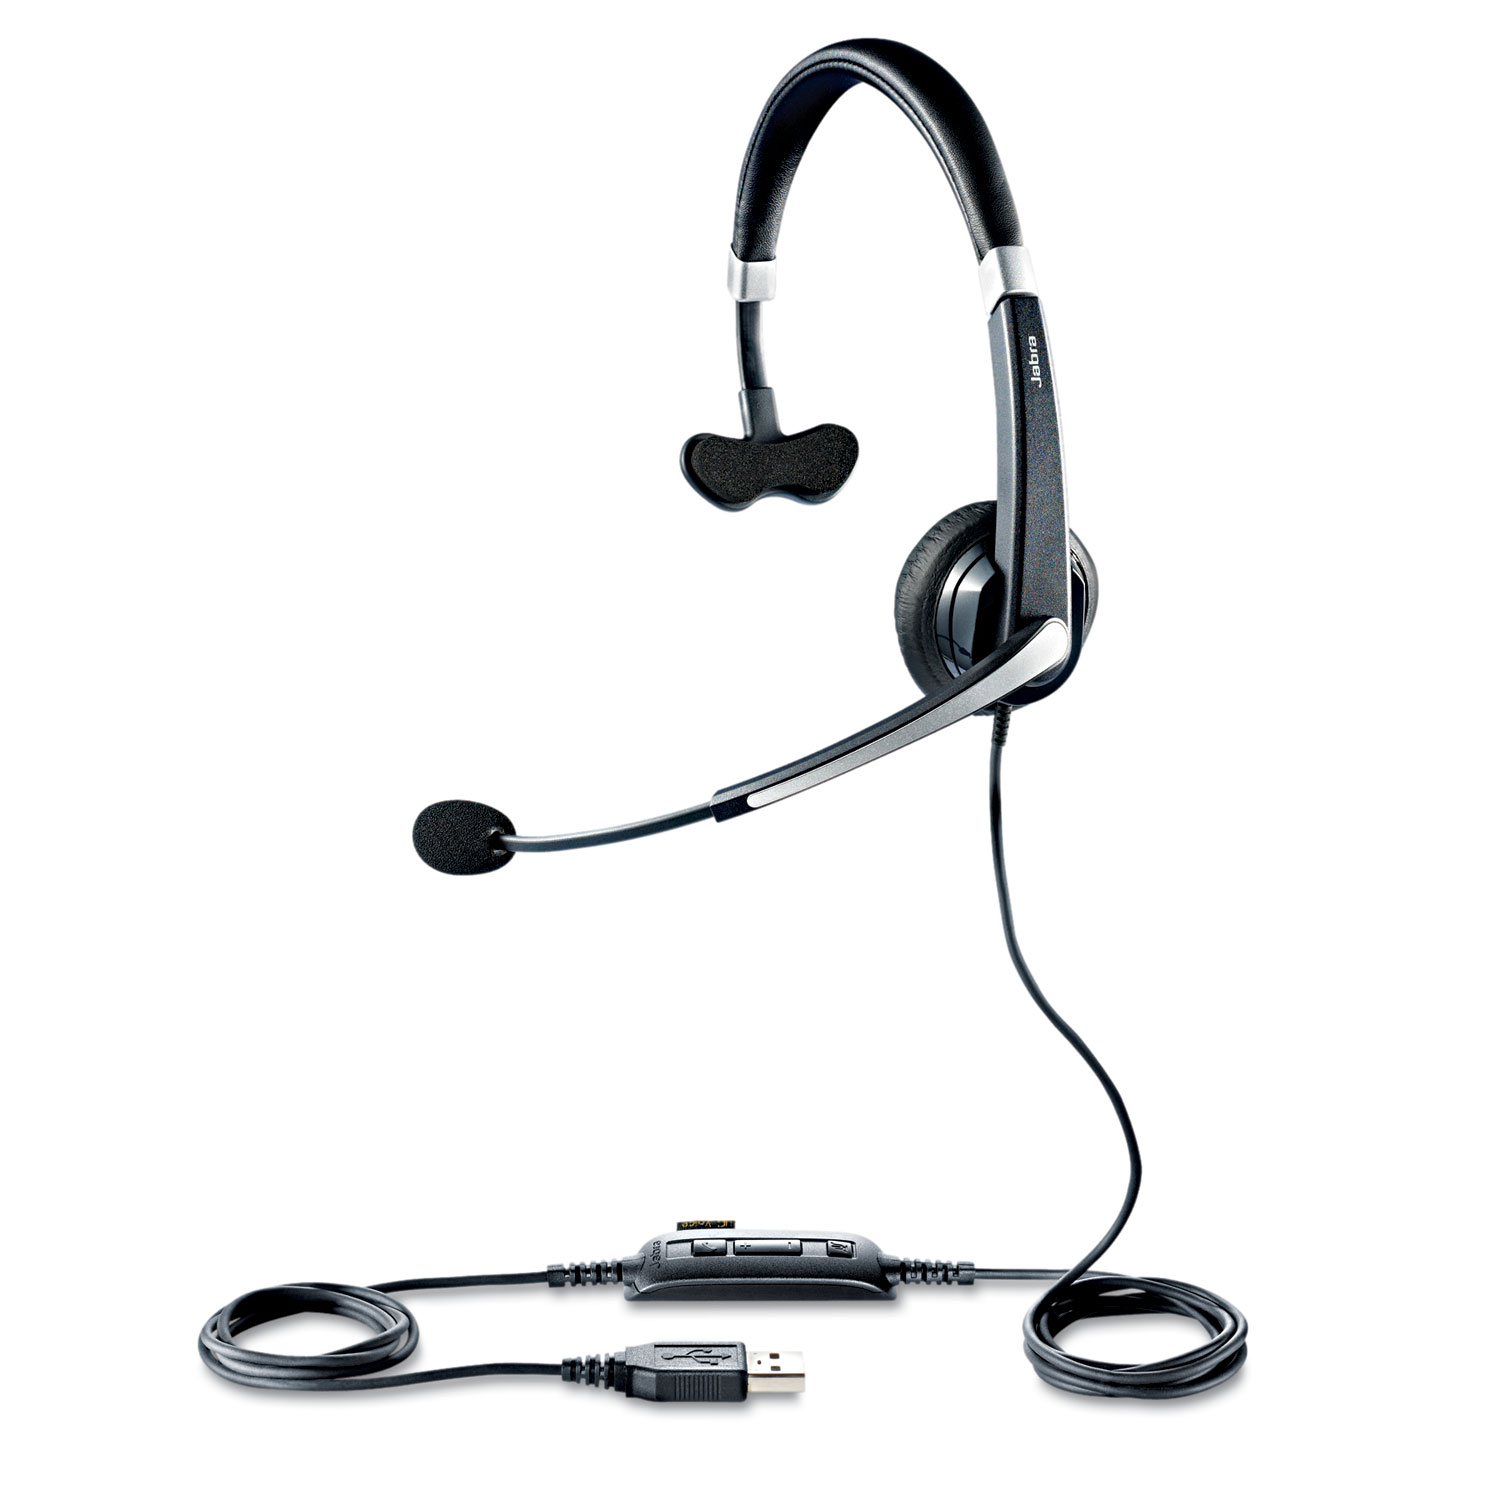 UC Voice 550 Monaural Over-the-Head Corded Headset